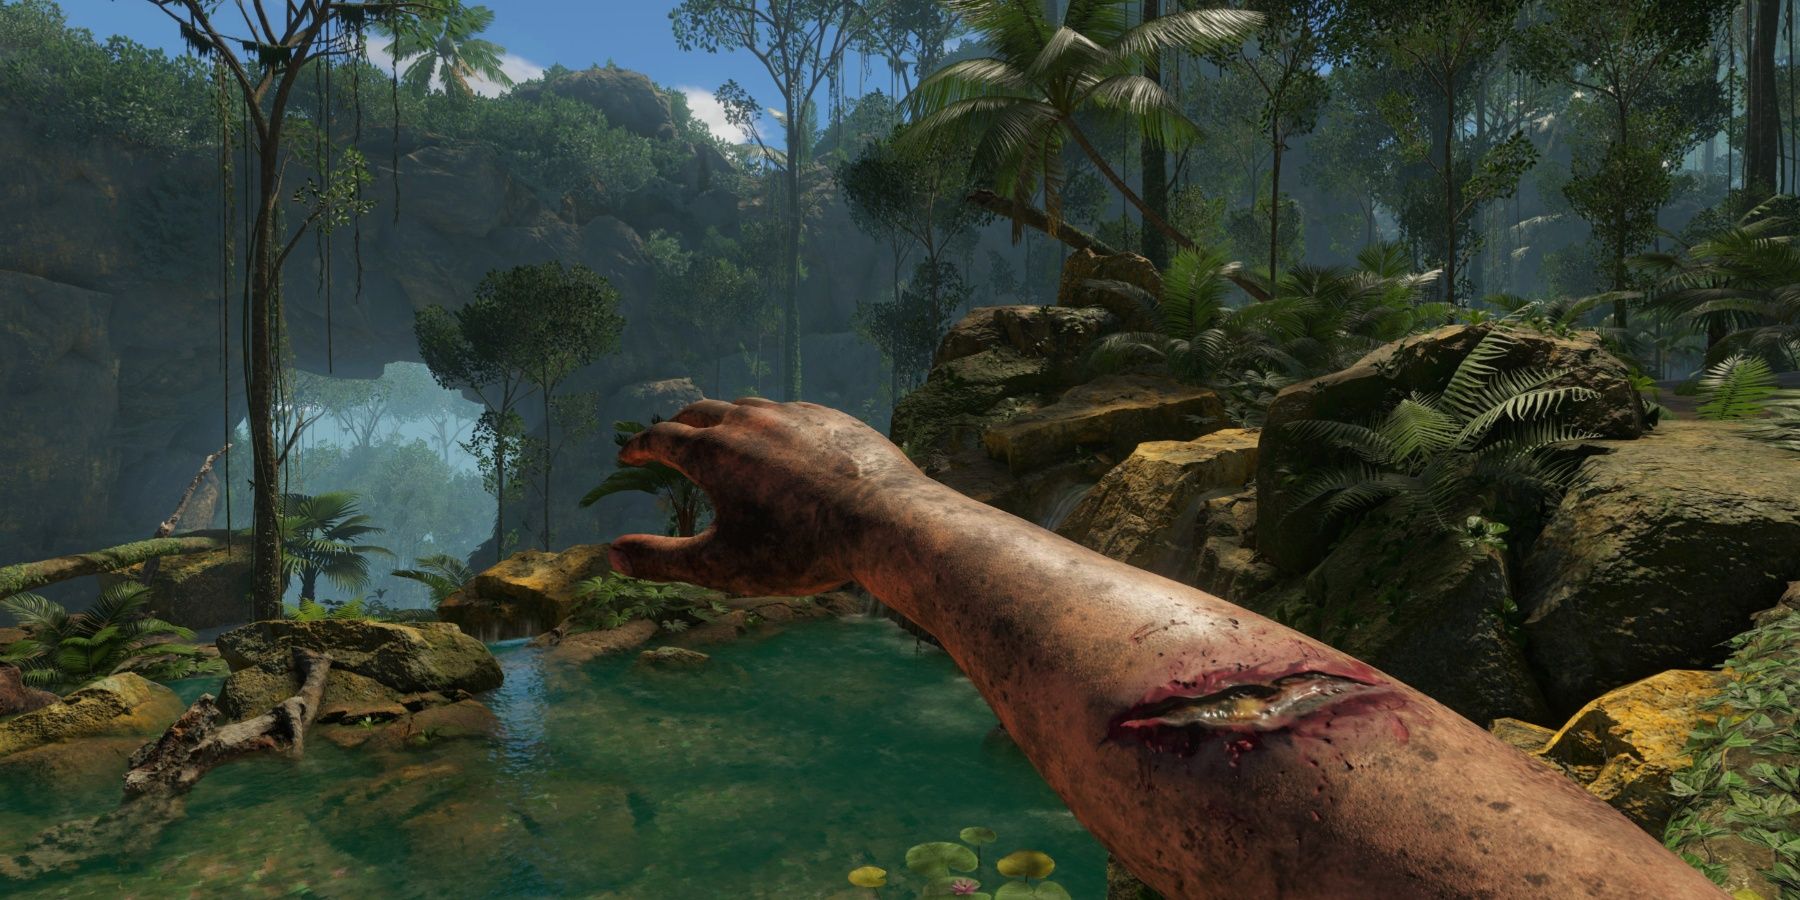 The player's arm, which has a gash in it, reaching out over a lake in the rainforest in Green Hell